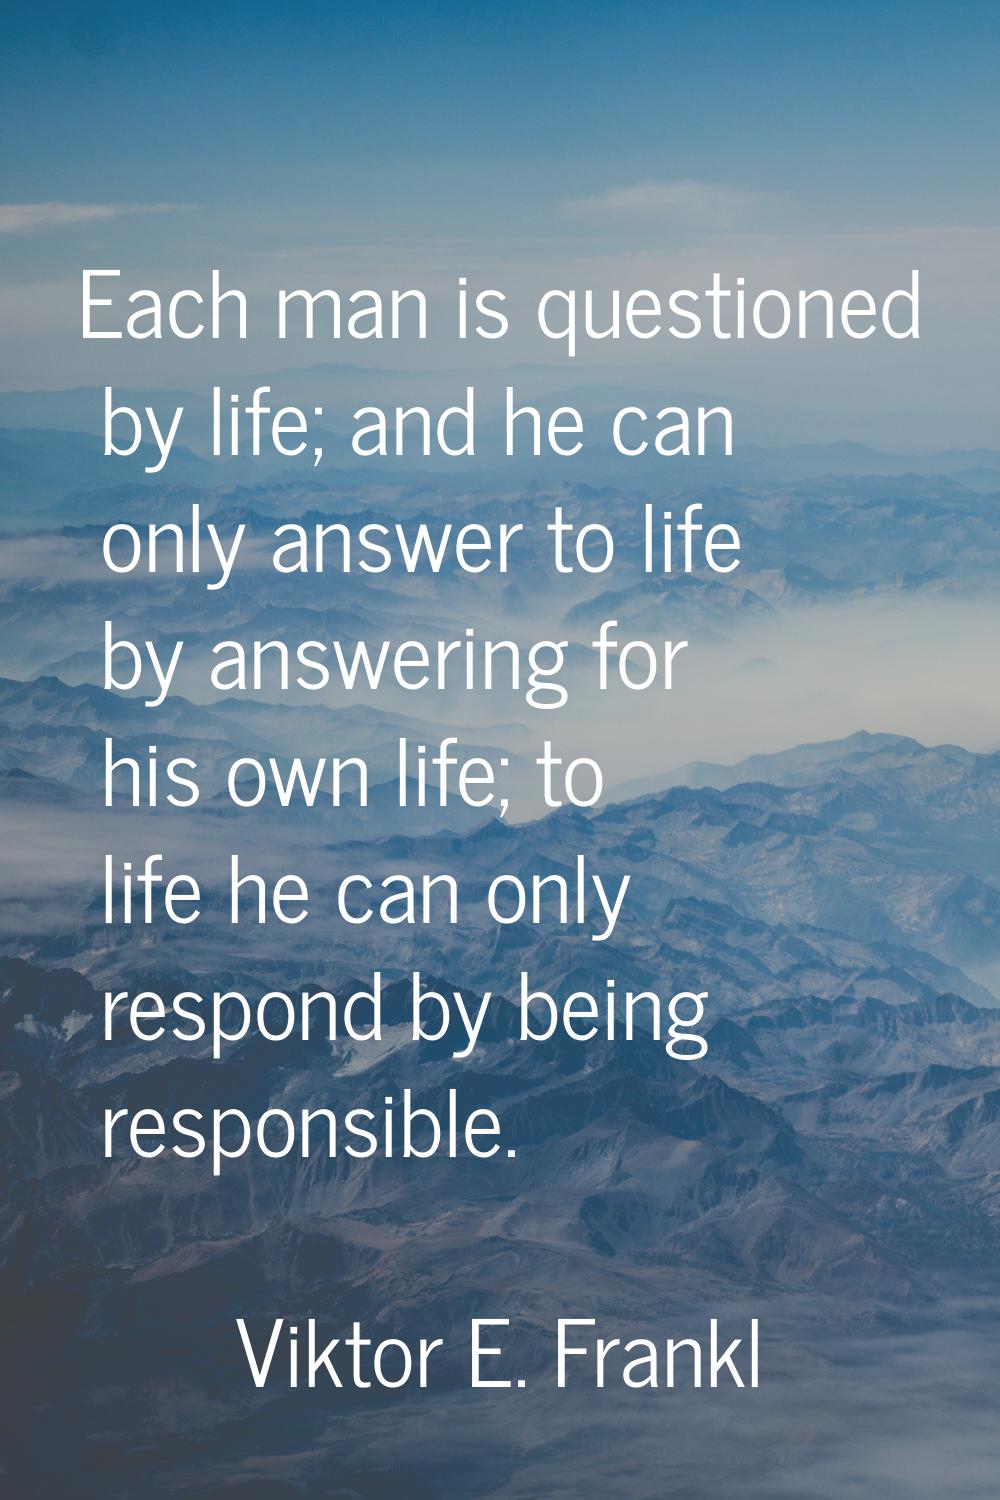 Each man is questioned by life; and he can only answer to life by answering for his own life; to li